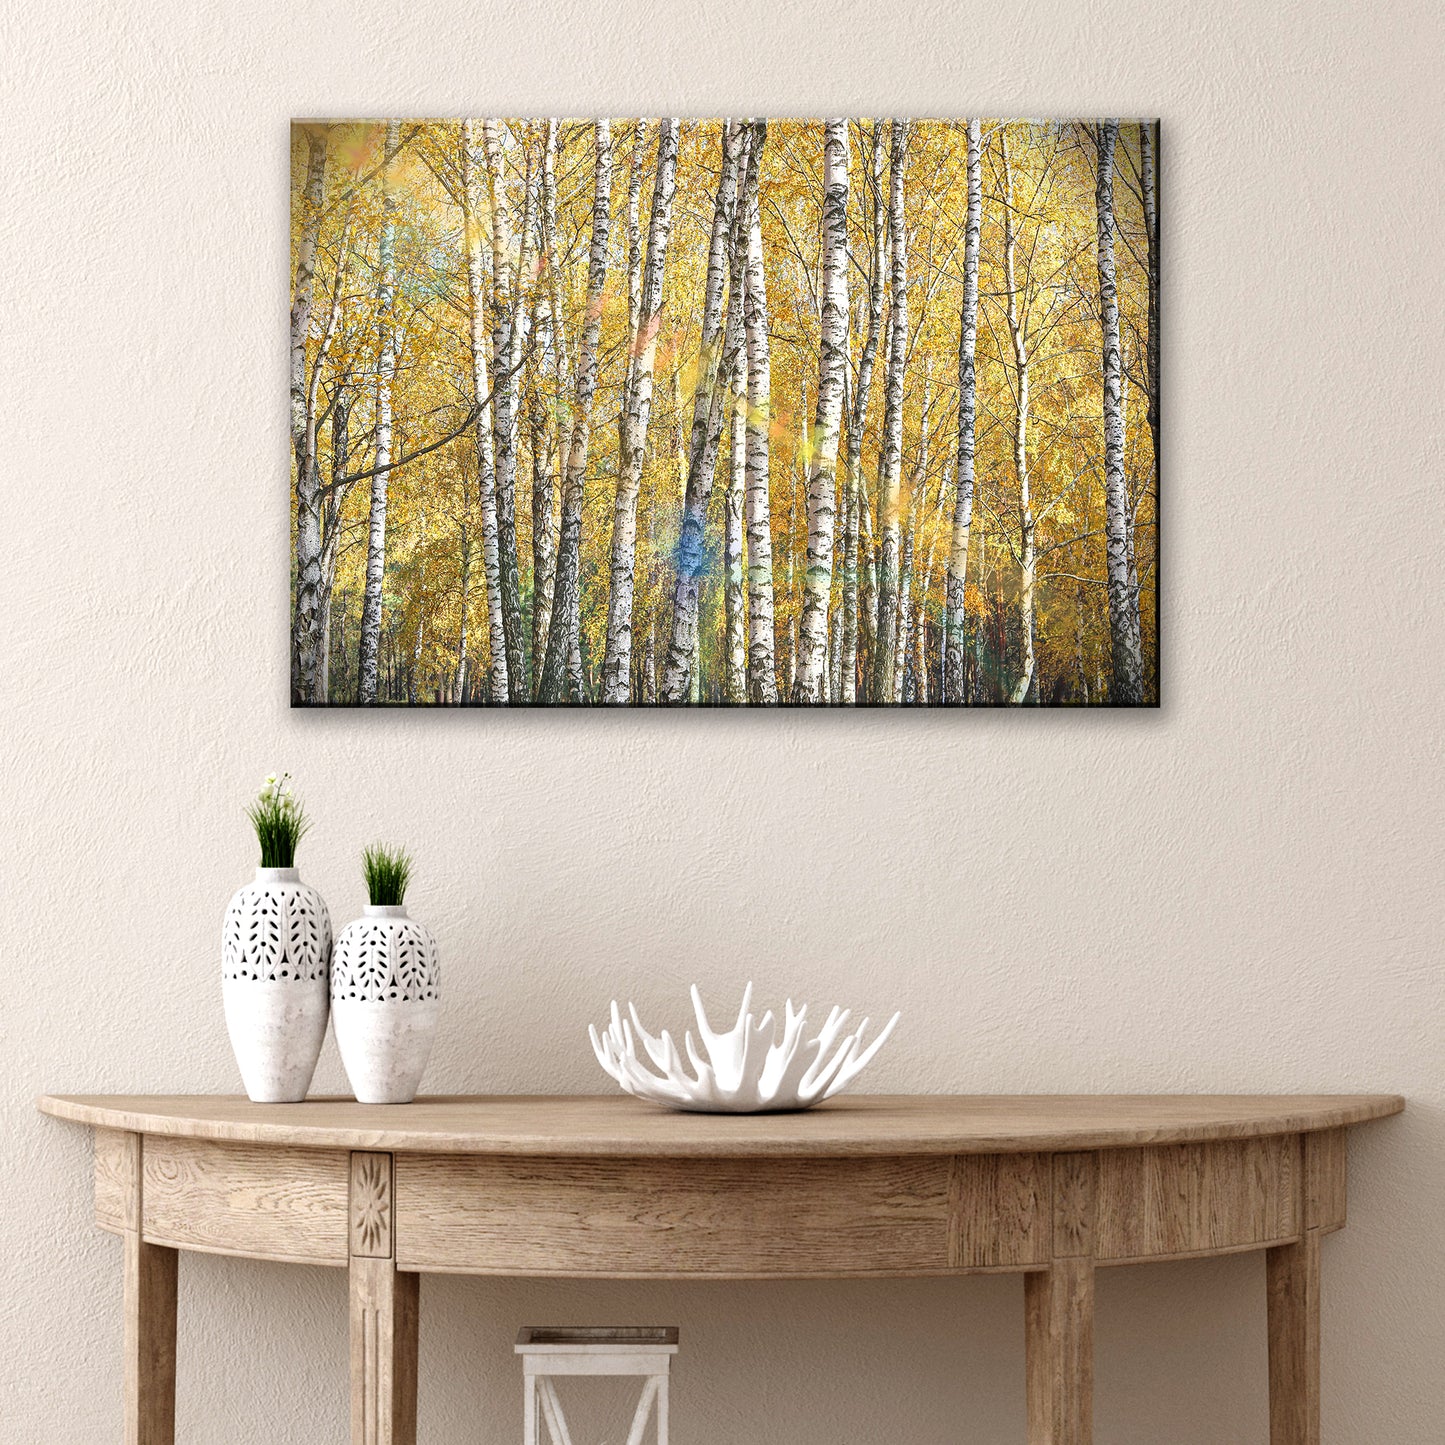 White Birch Trees With Golden Leaves Canvas Wall Art - Image by Tailored Canvases